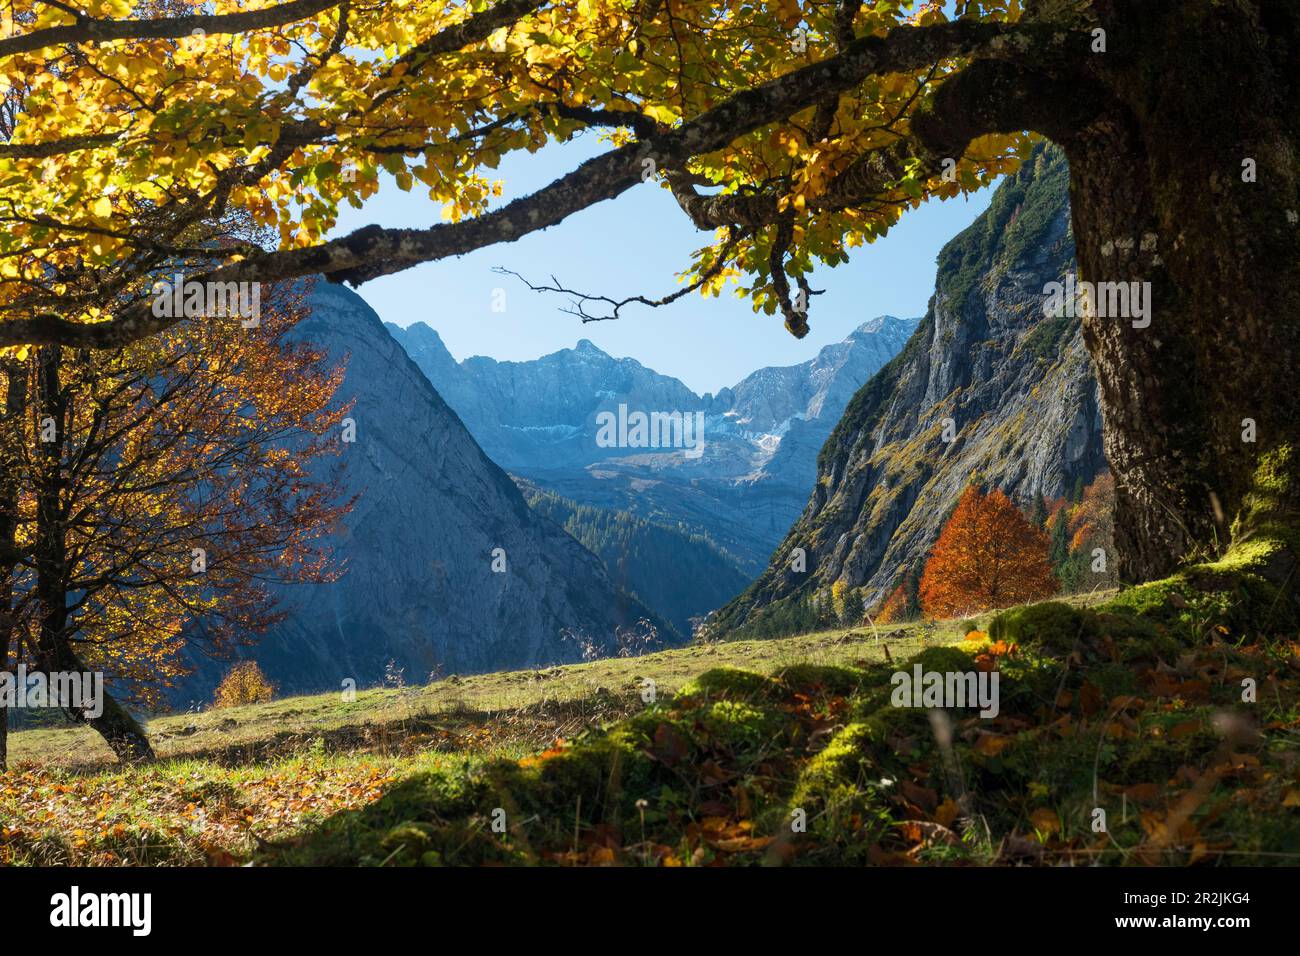 Großer Ahornboden, sycamore maple (Acer pseudoplatanus), autumn colors in the Eng, Austria, Europe Stock Photo